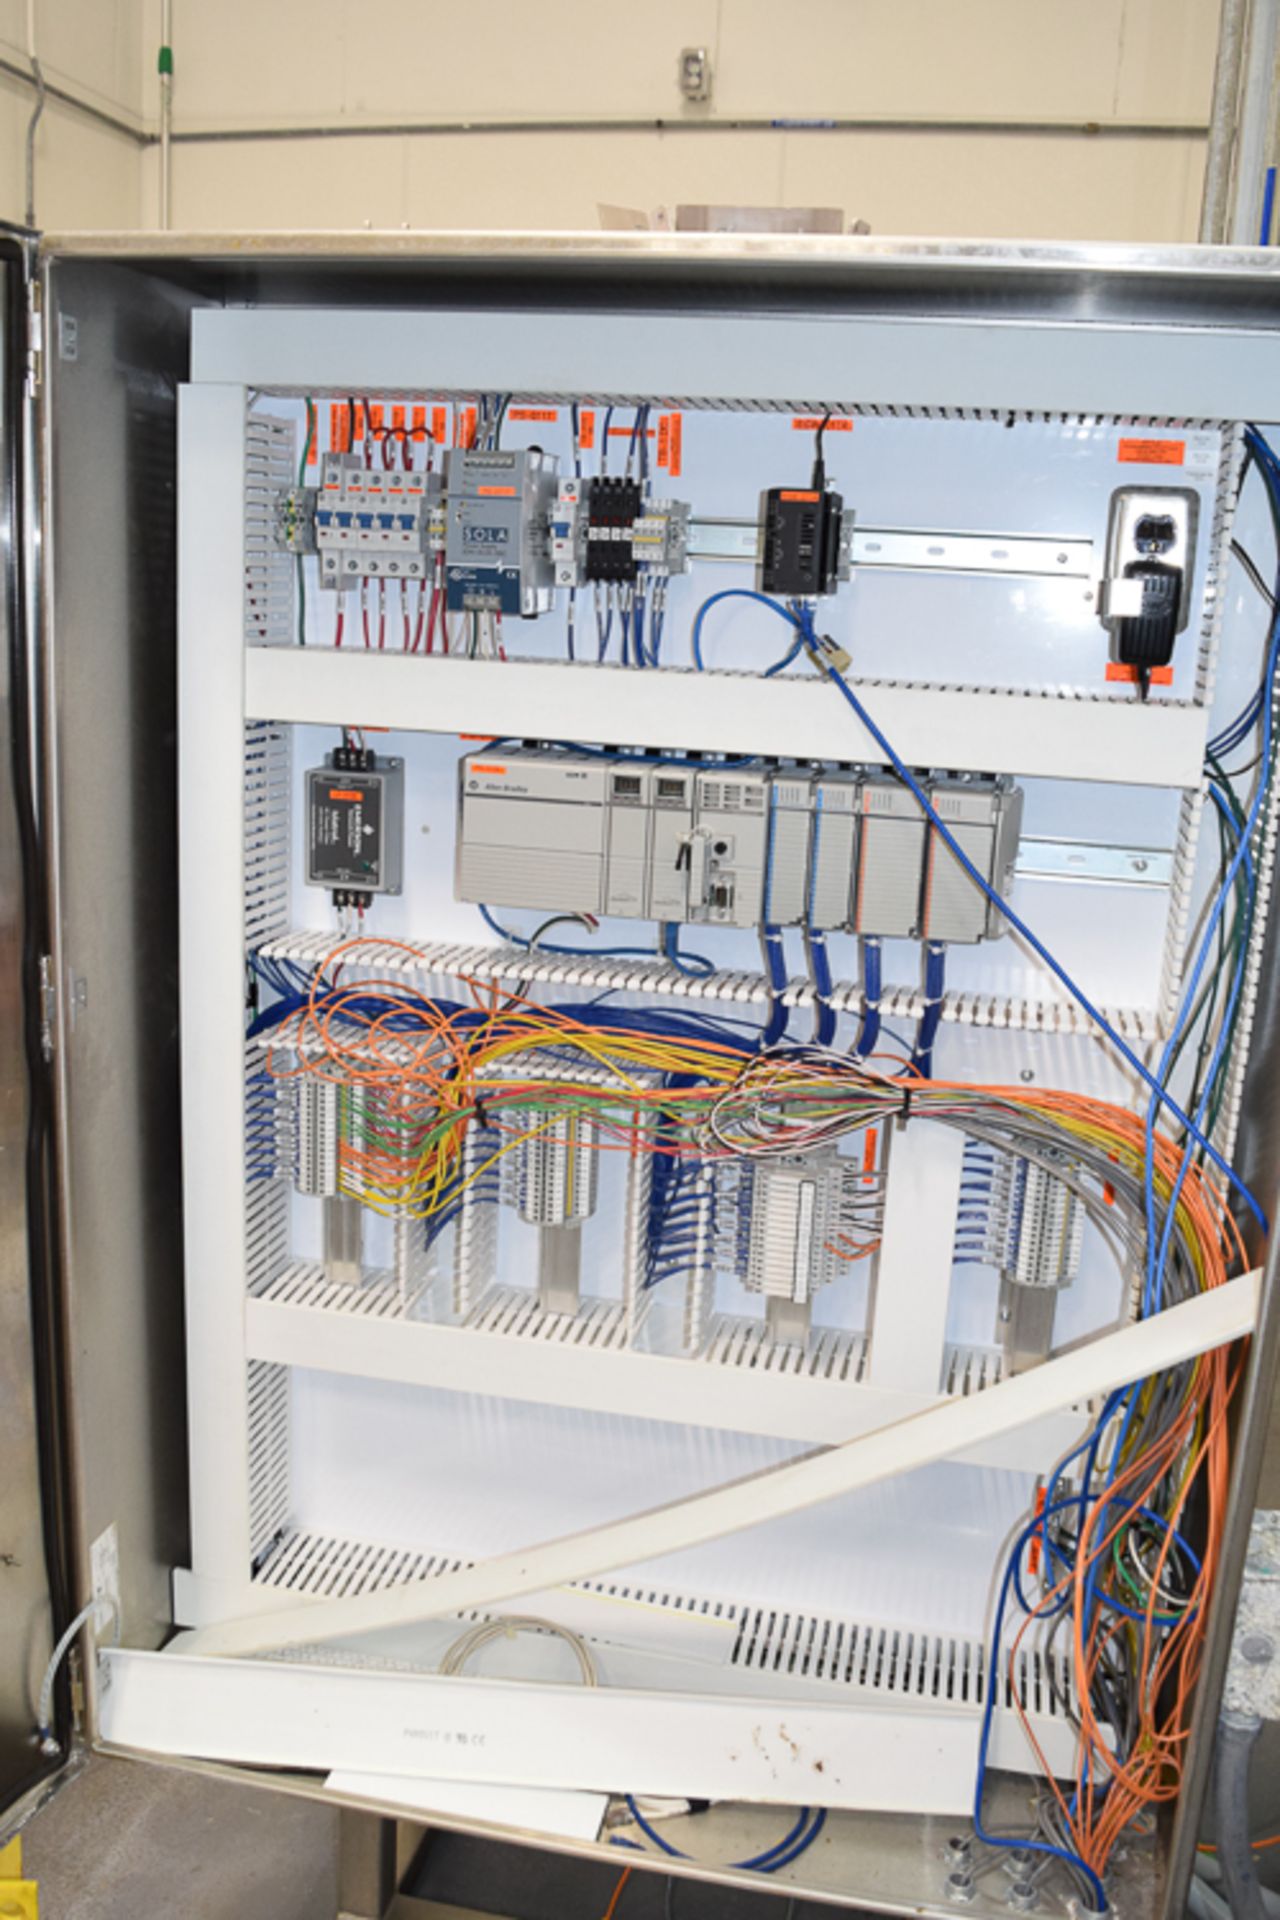 Allen Bradley Compact Logix L43 PLC with Relays Power Supply and S/S Enclosure, Rigging Fee: